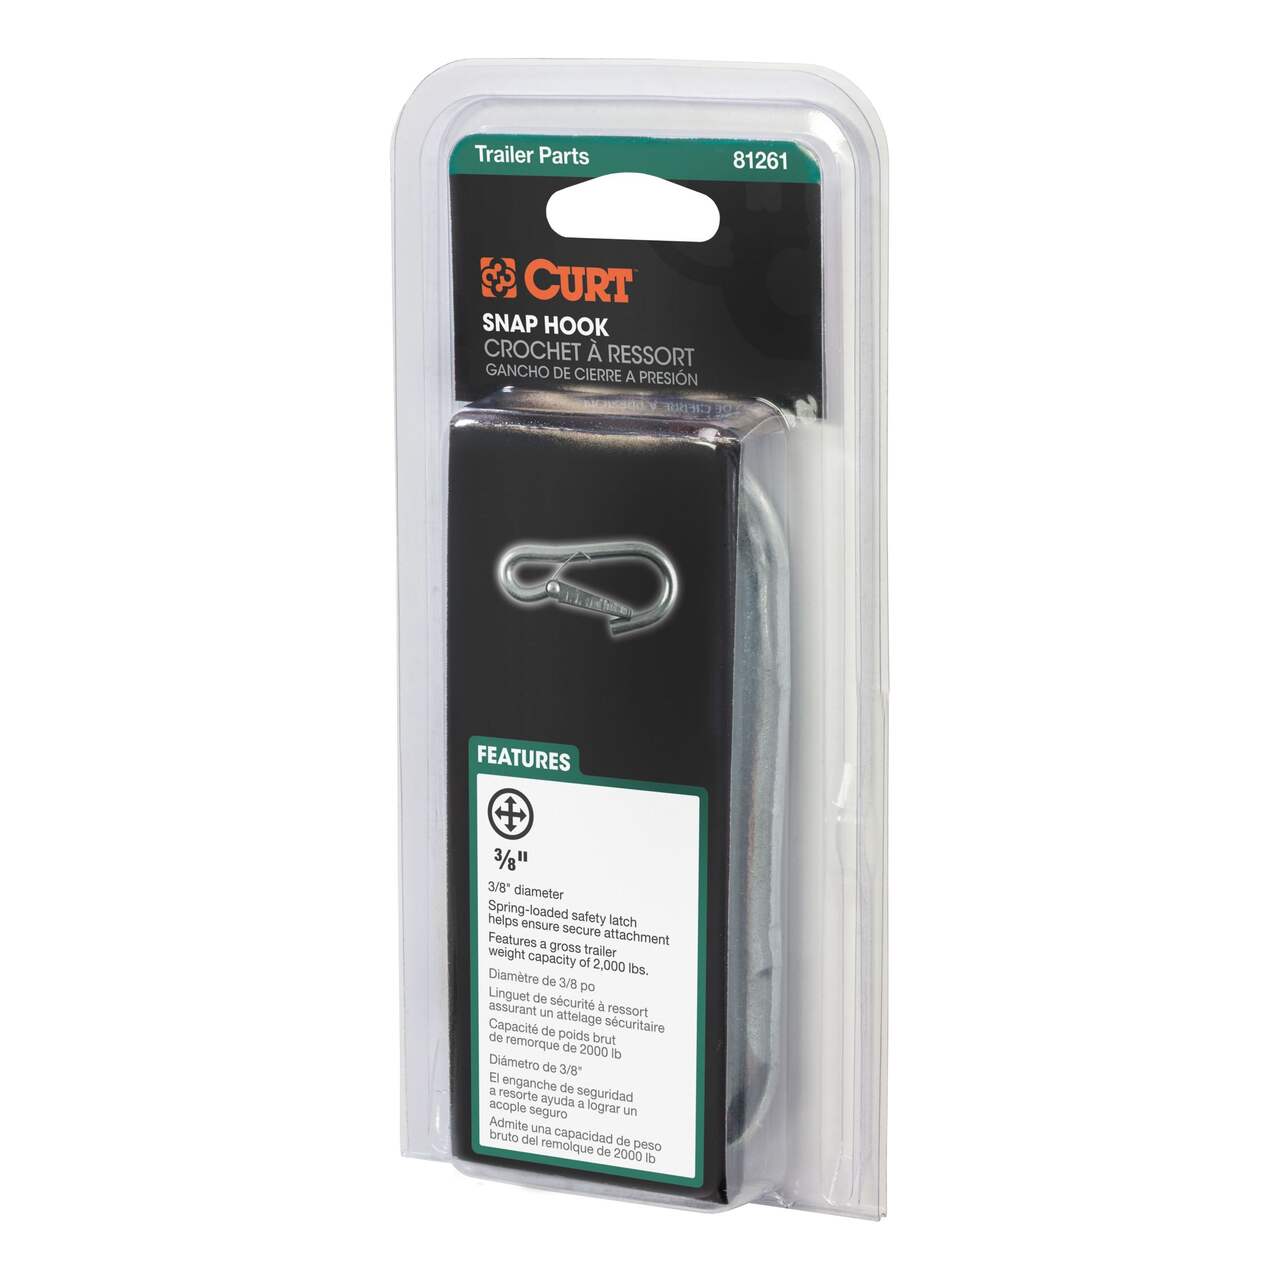 CURT 3/8 Snap Hook (2,000-lb, Packaged)